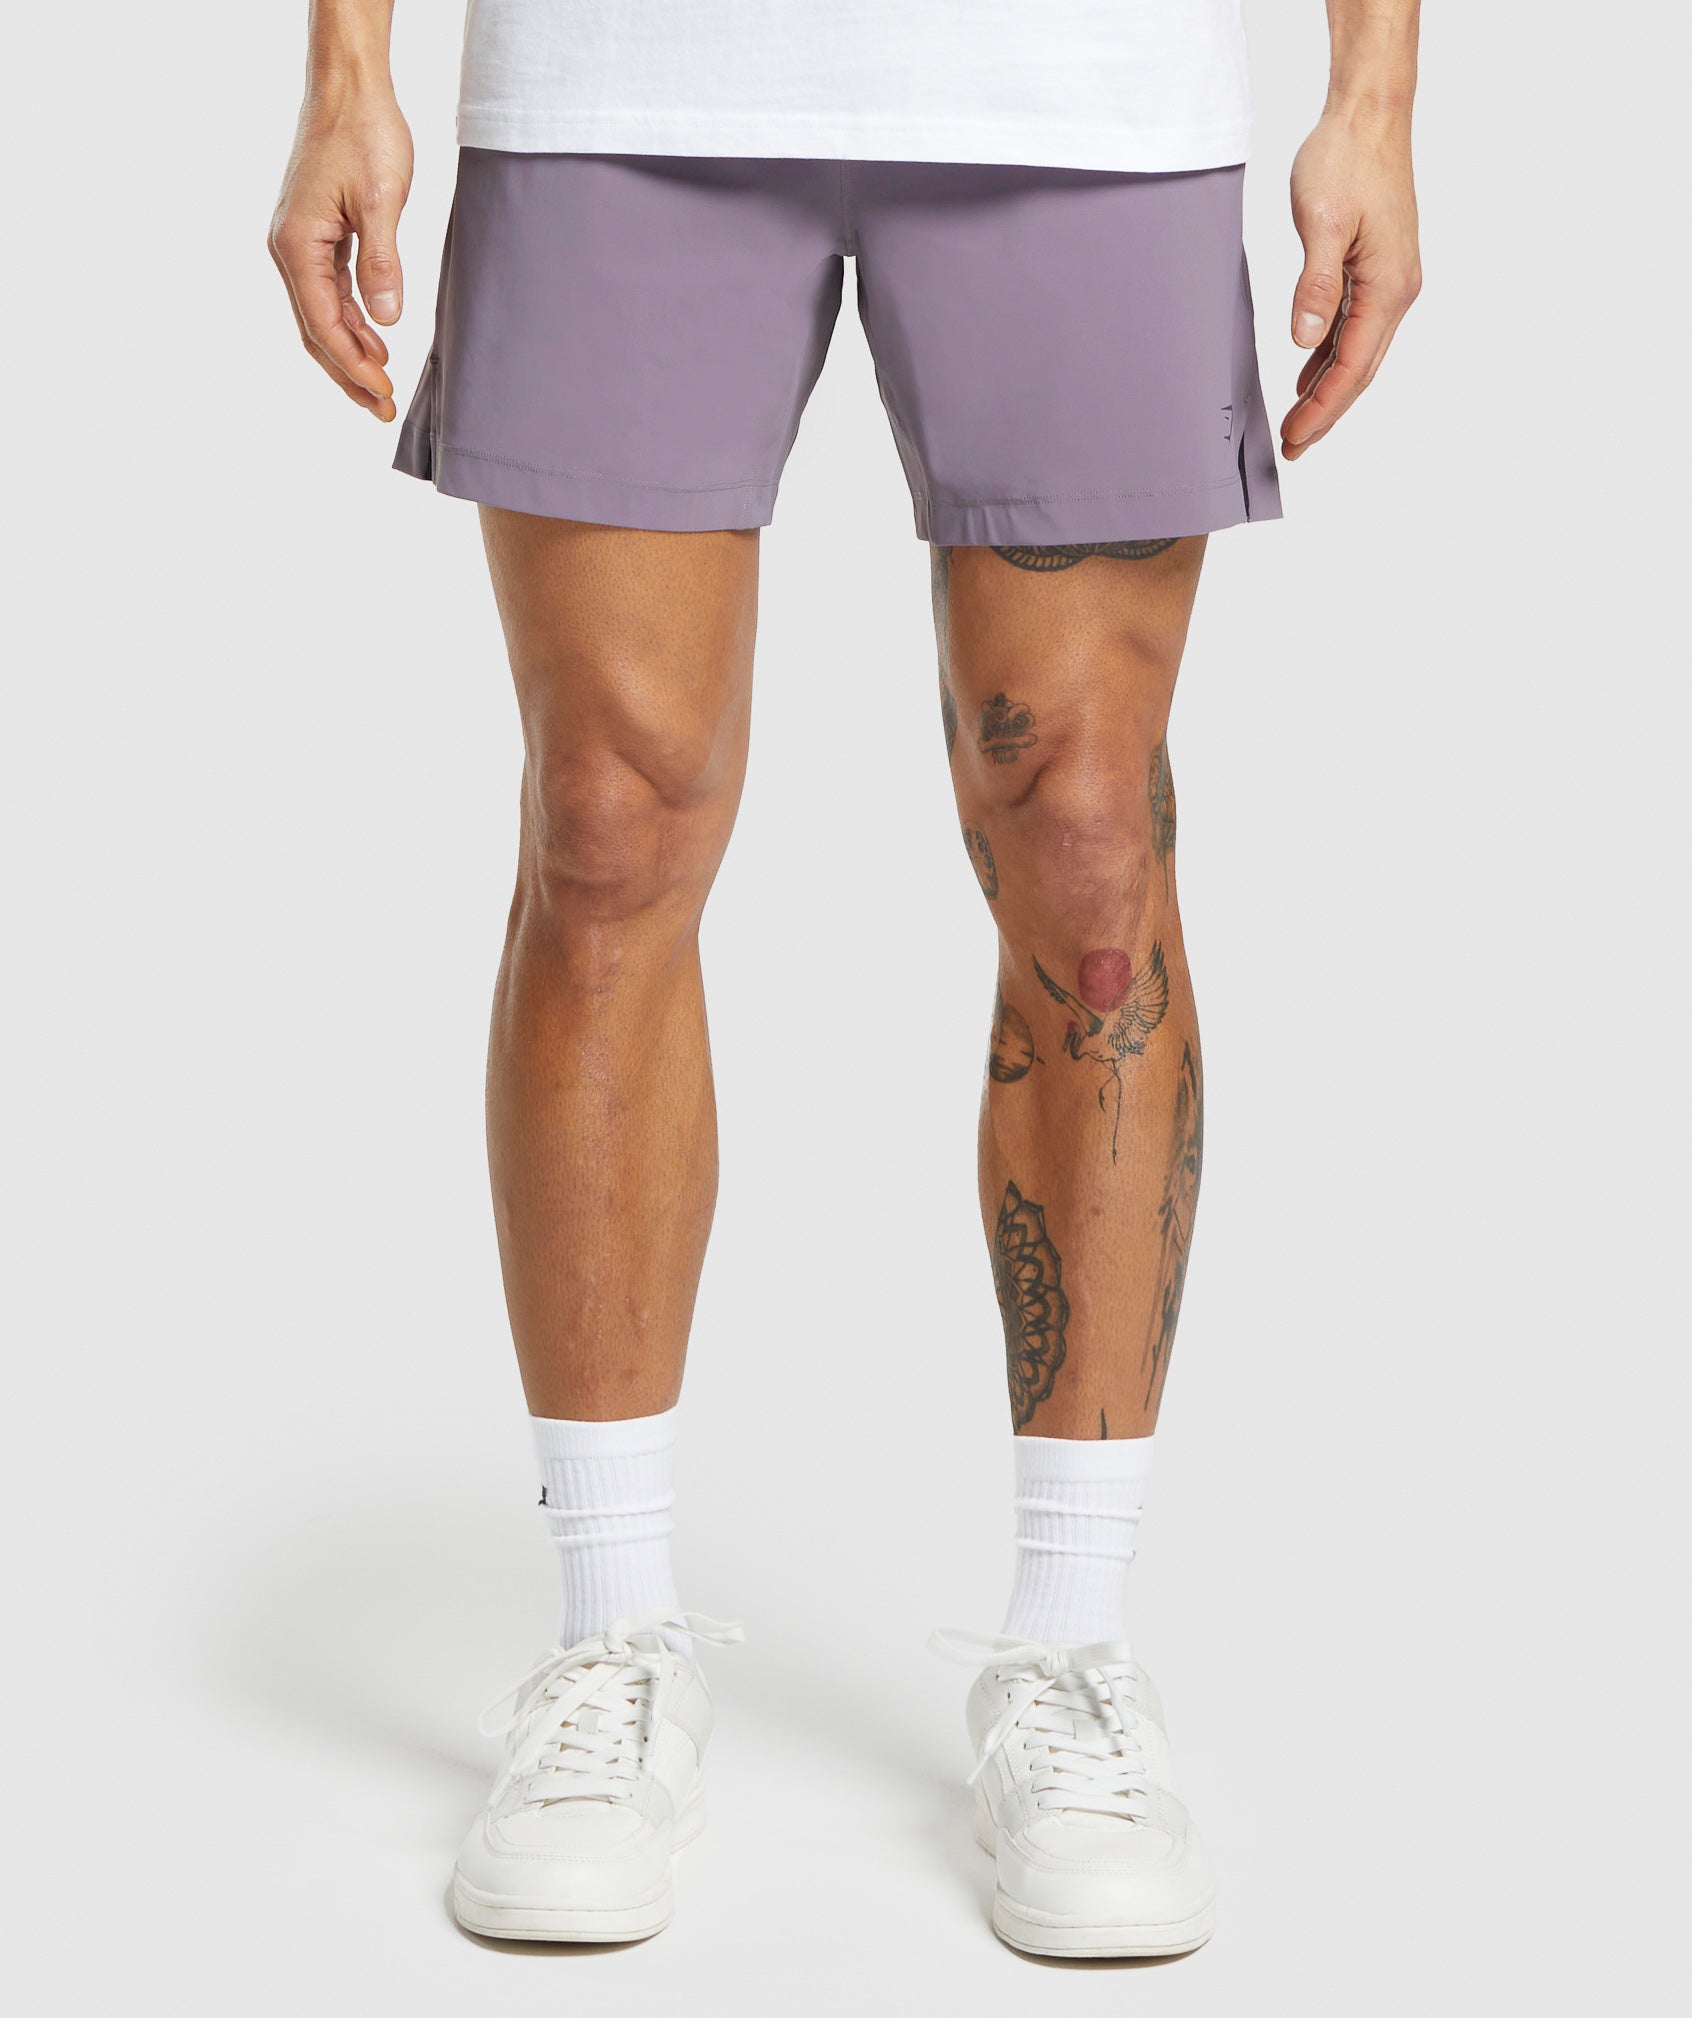 6 Inch Workout & Gym Shorts - Gymshark